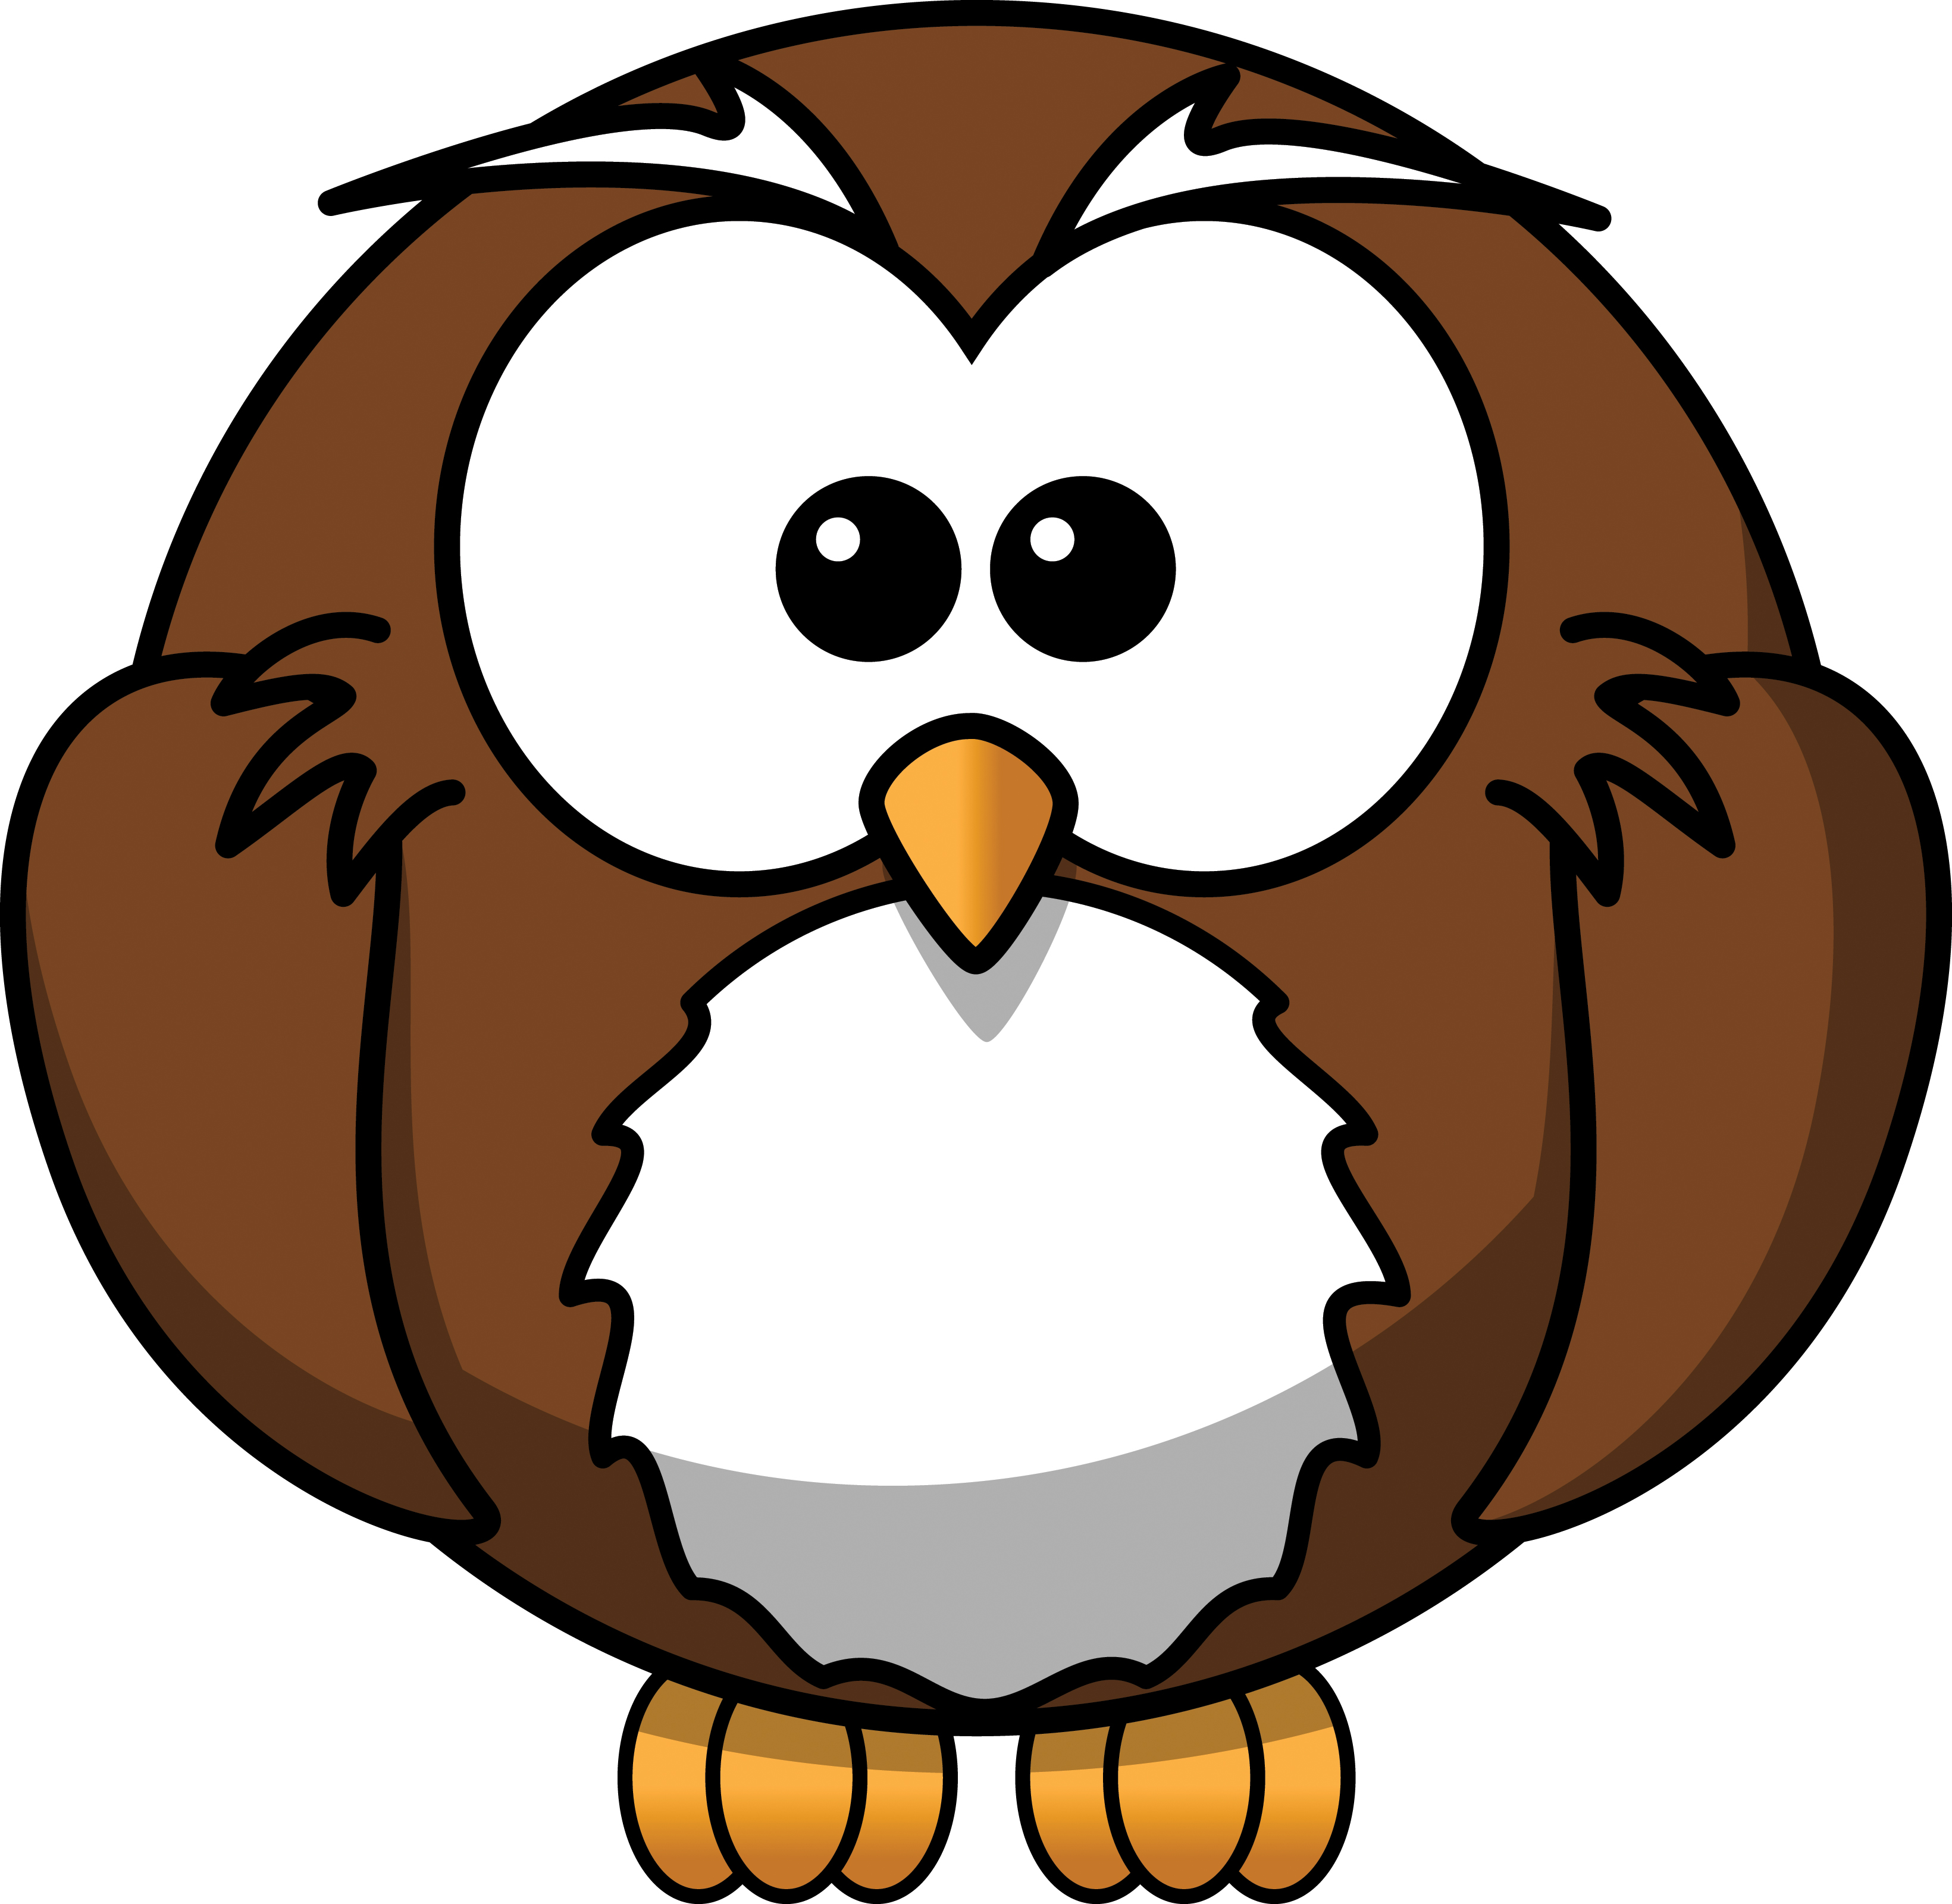 Nocturnal animal clipart